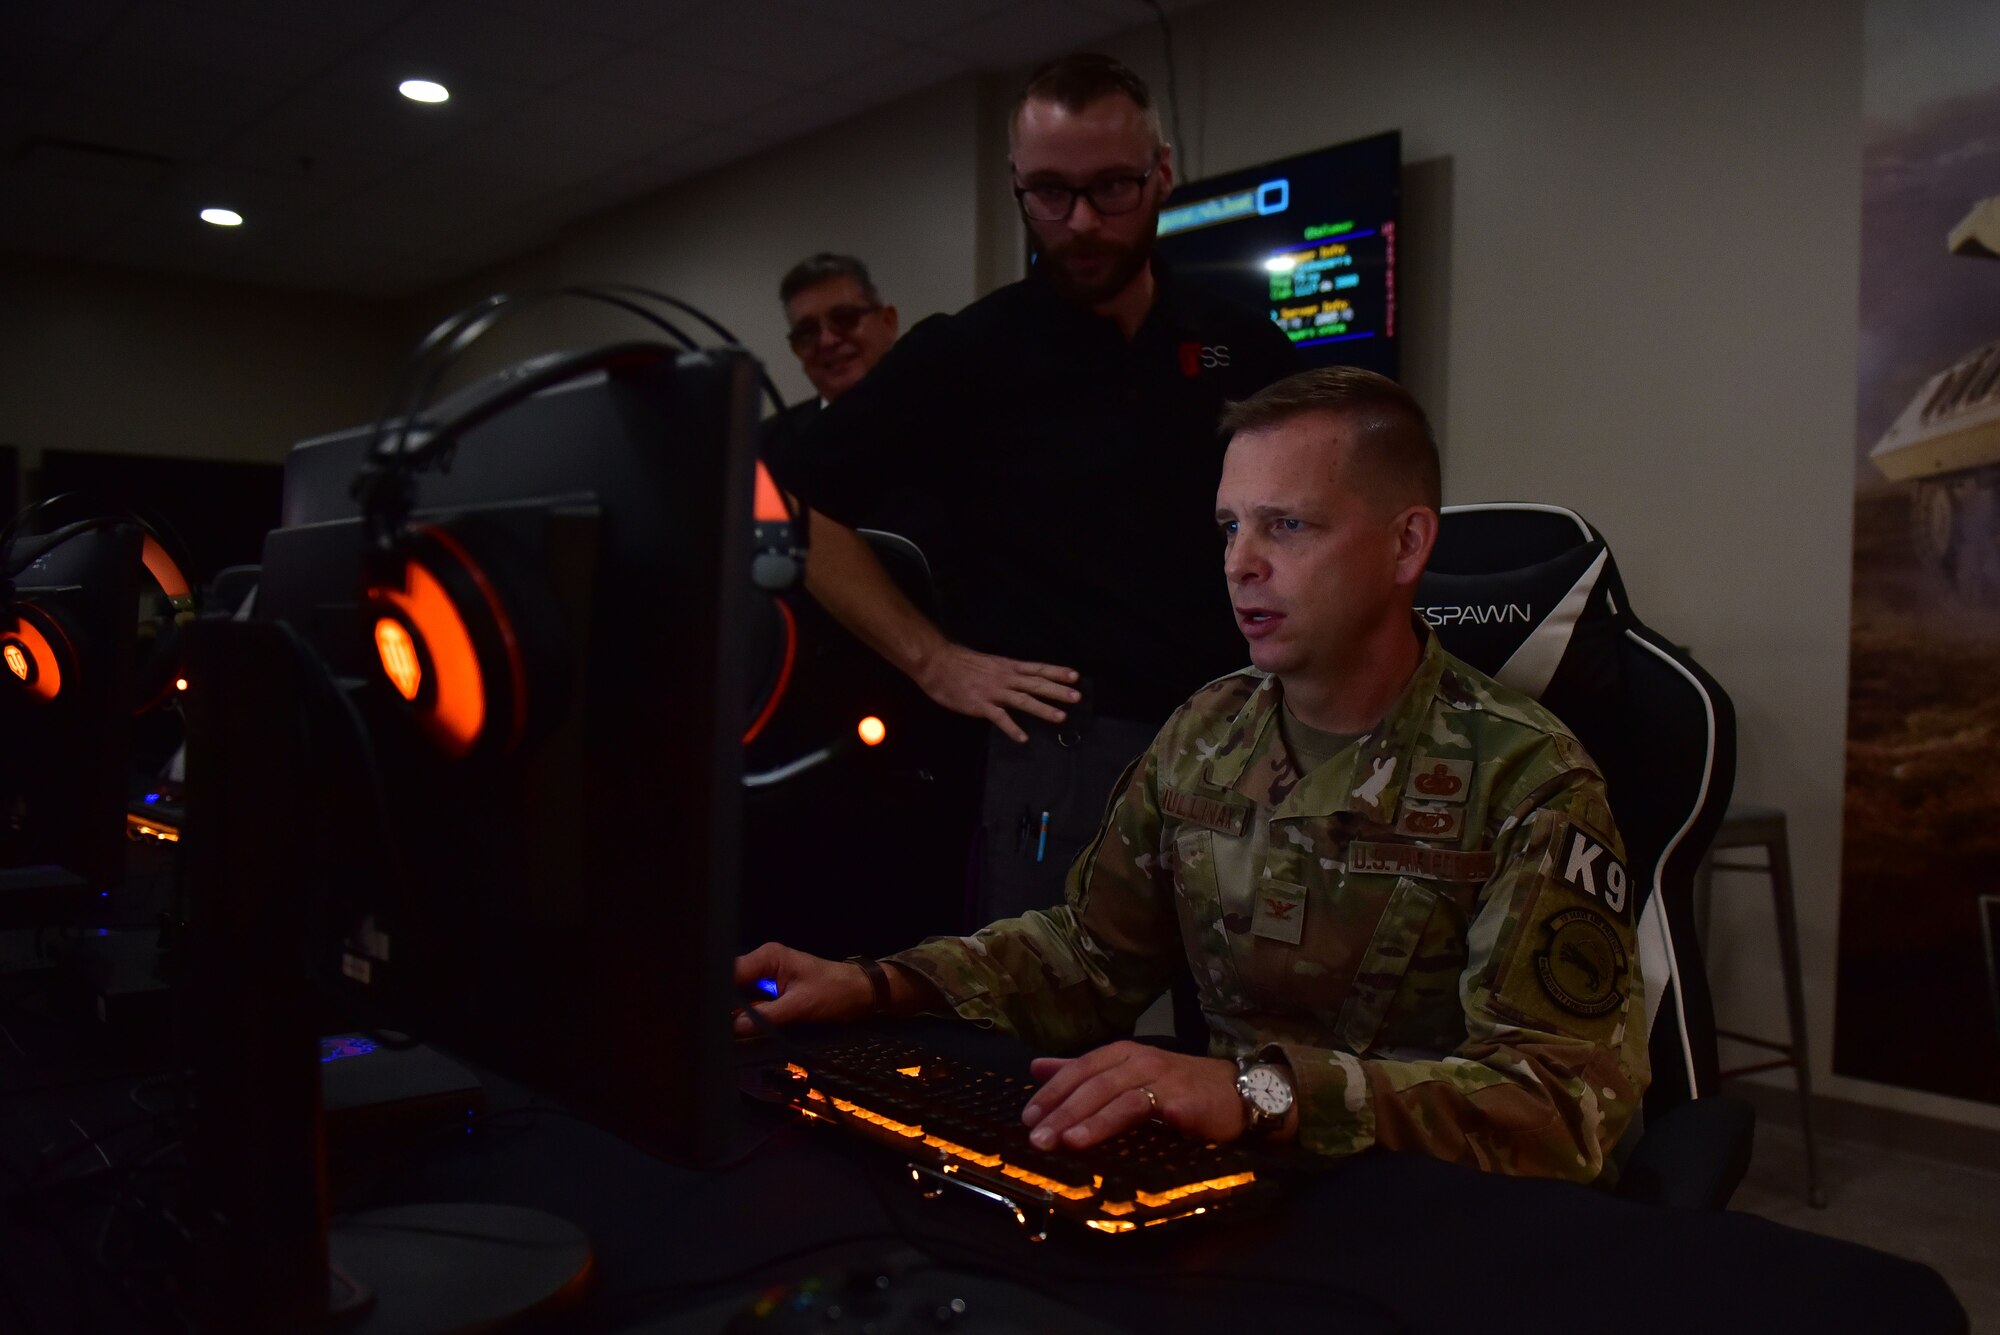 Col. Anthony Mullinax, 4th Mission Support Group commander, plays in the new USO of North Carolina center during the grand opening, Nov. 21, 2019, at Seymour Johnson Air Force Base, N.C. The USO of NC – SJAFB Center is home to the first USO E-Sports gaming arena, which includes 10 top-of-the-line gaming computers, gaming consoles and stations for guests who choose to bring their personal consoles. (U.S. Air Force photo by Senior Airman Victoria Boyton)